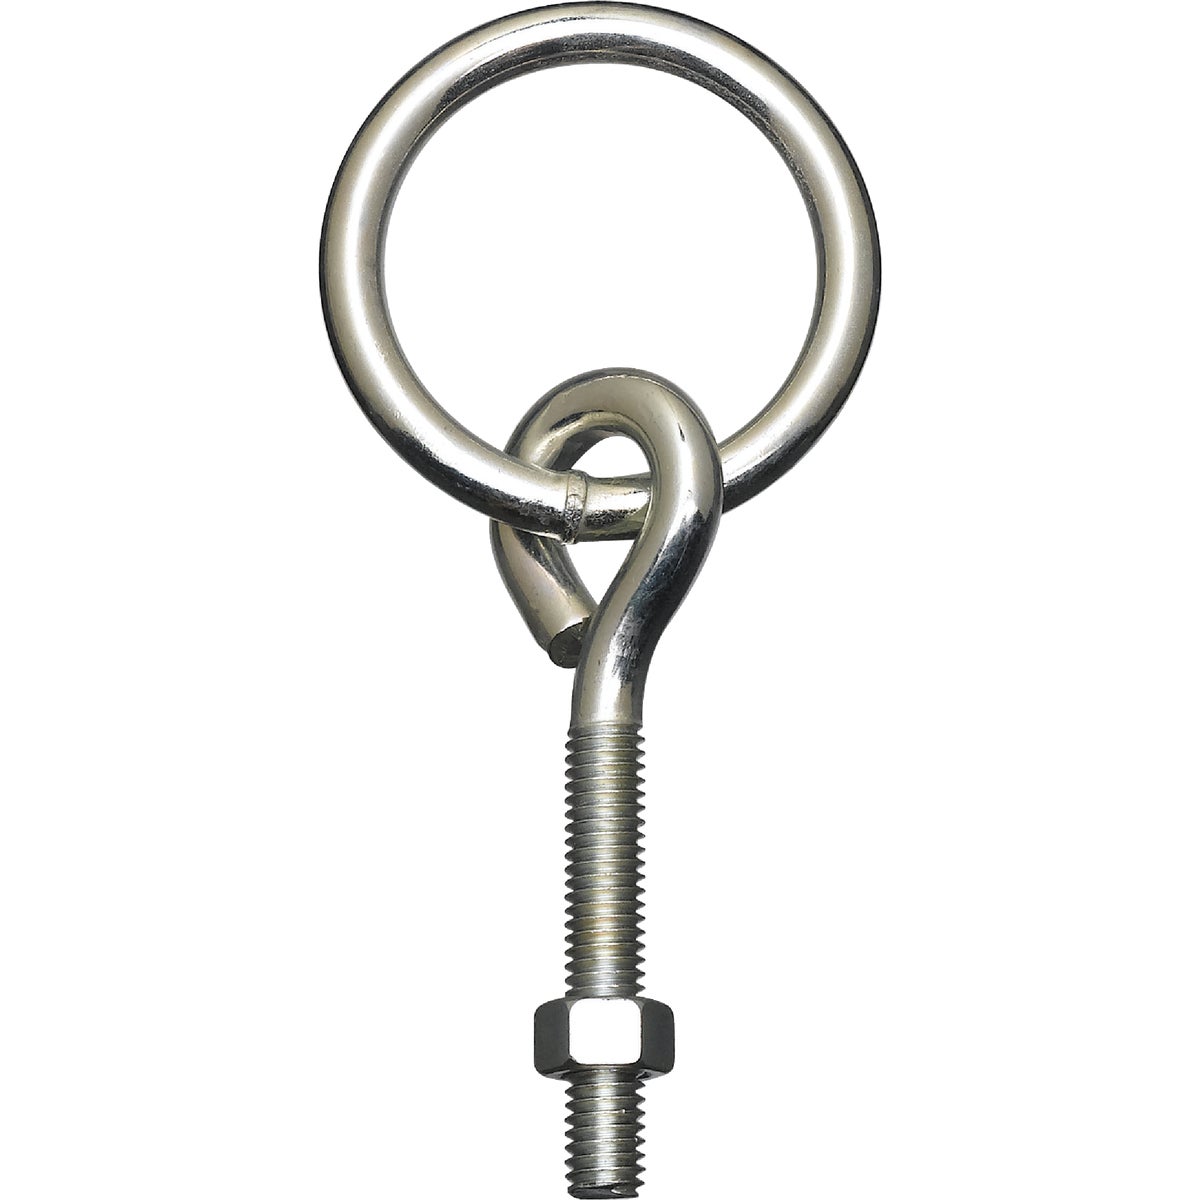 Item 201063, National catalog model No. 2061BC rings with eye bolts, nuts zinc plated.